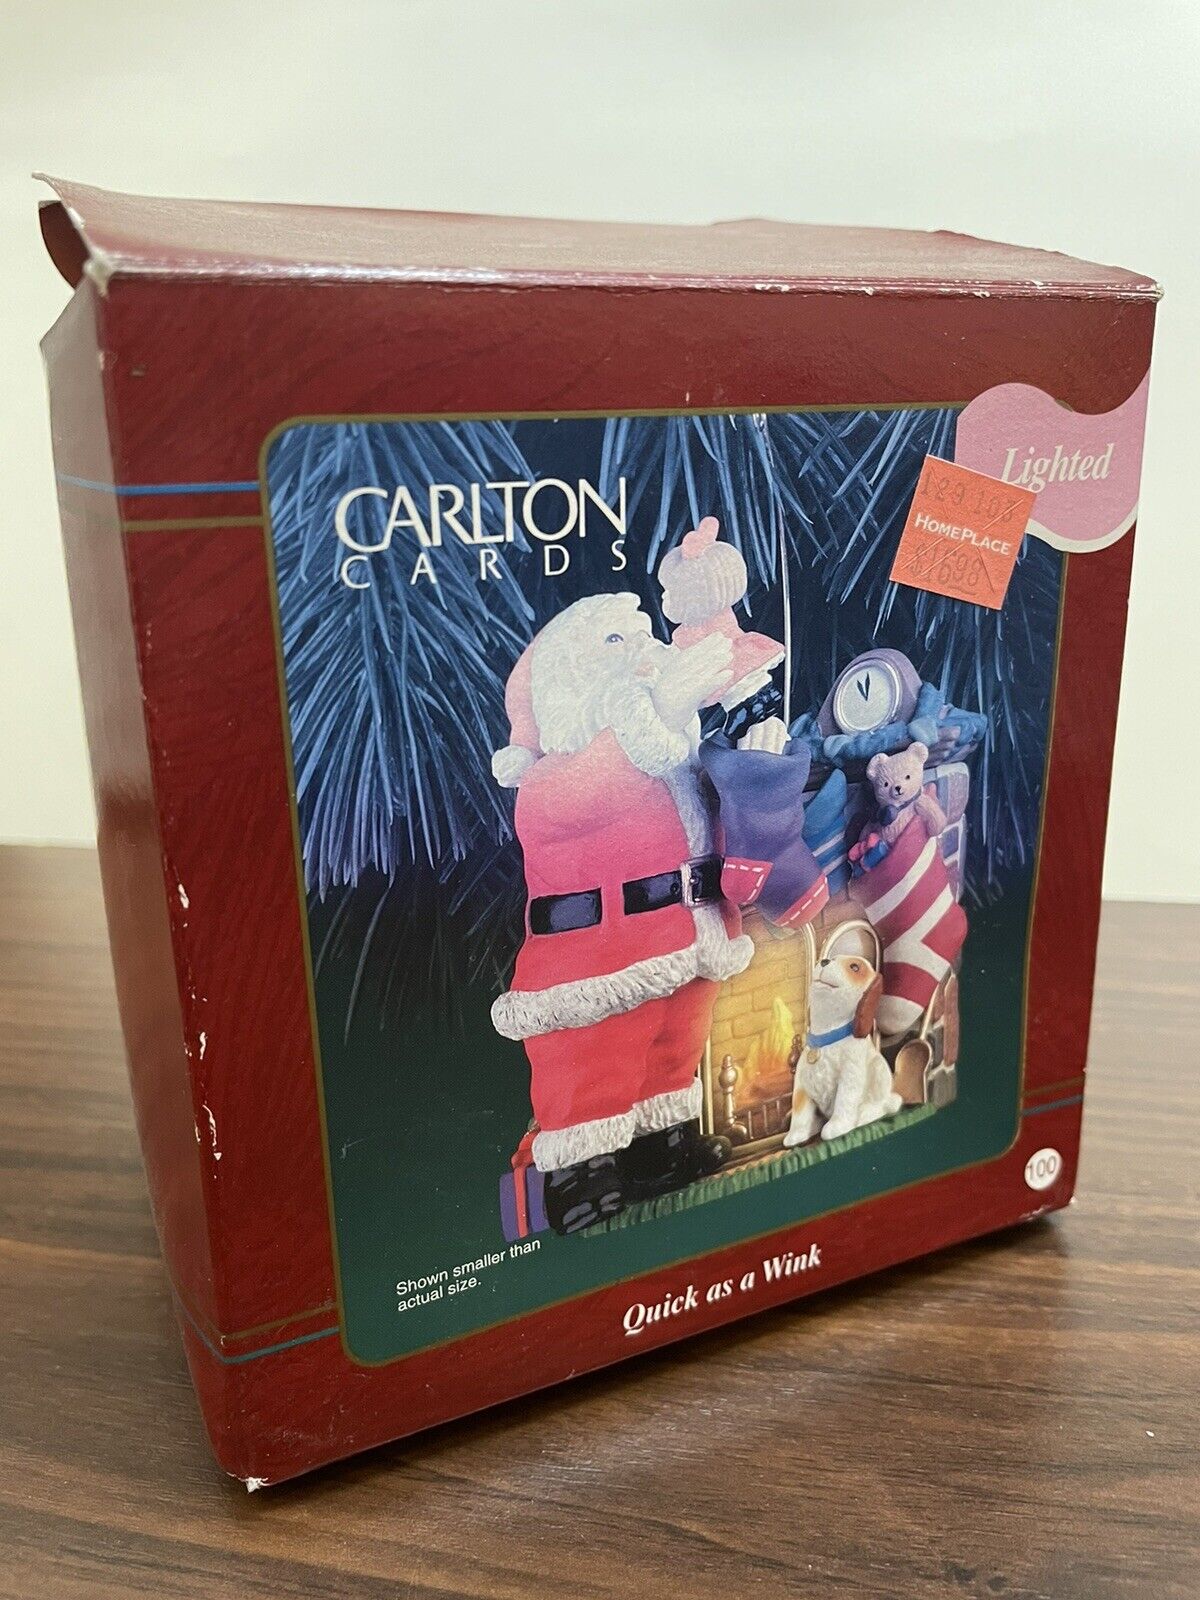 1998 Carlton Cards Quick As A Wink Lighted Christmas Santa Ornament Vintage